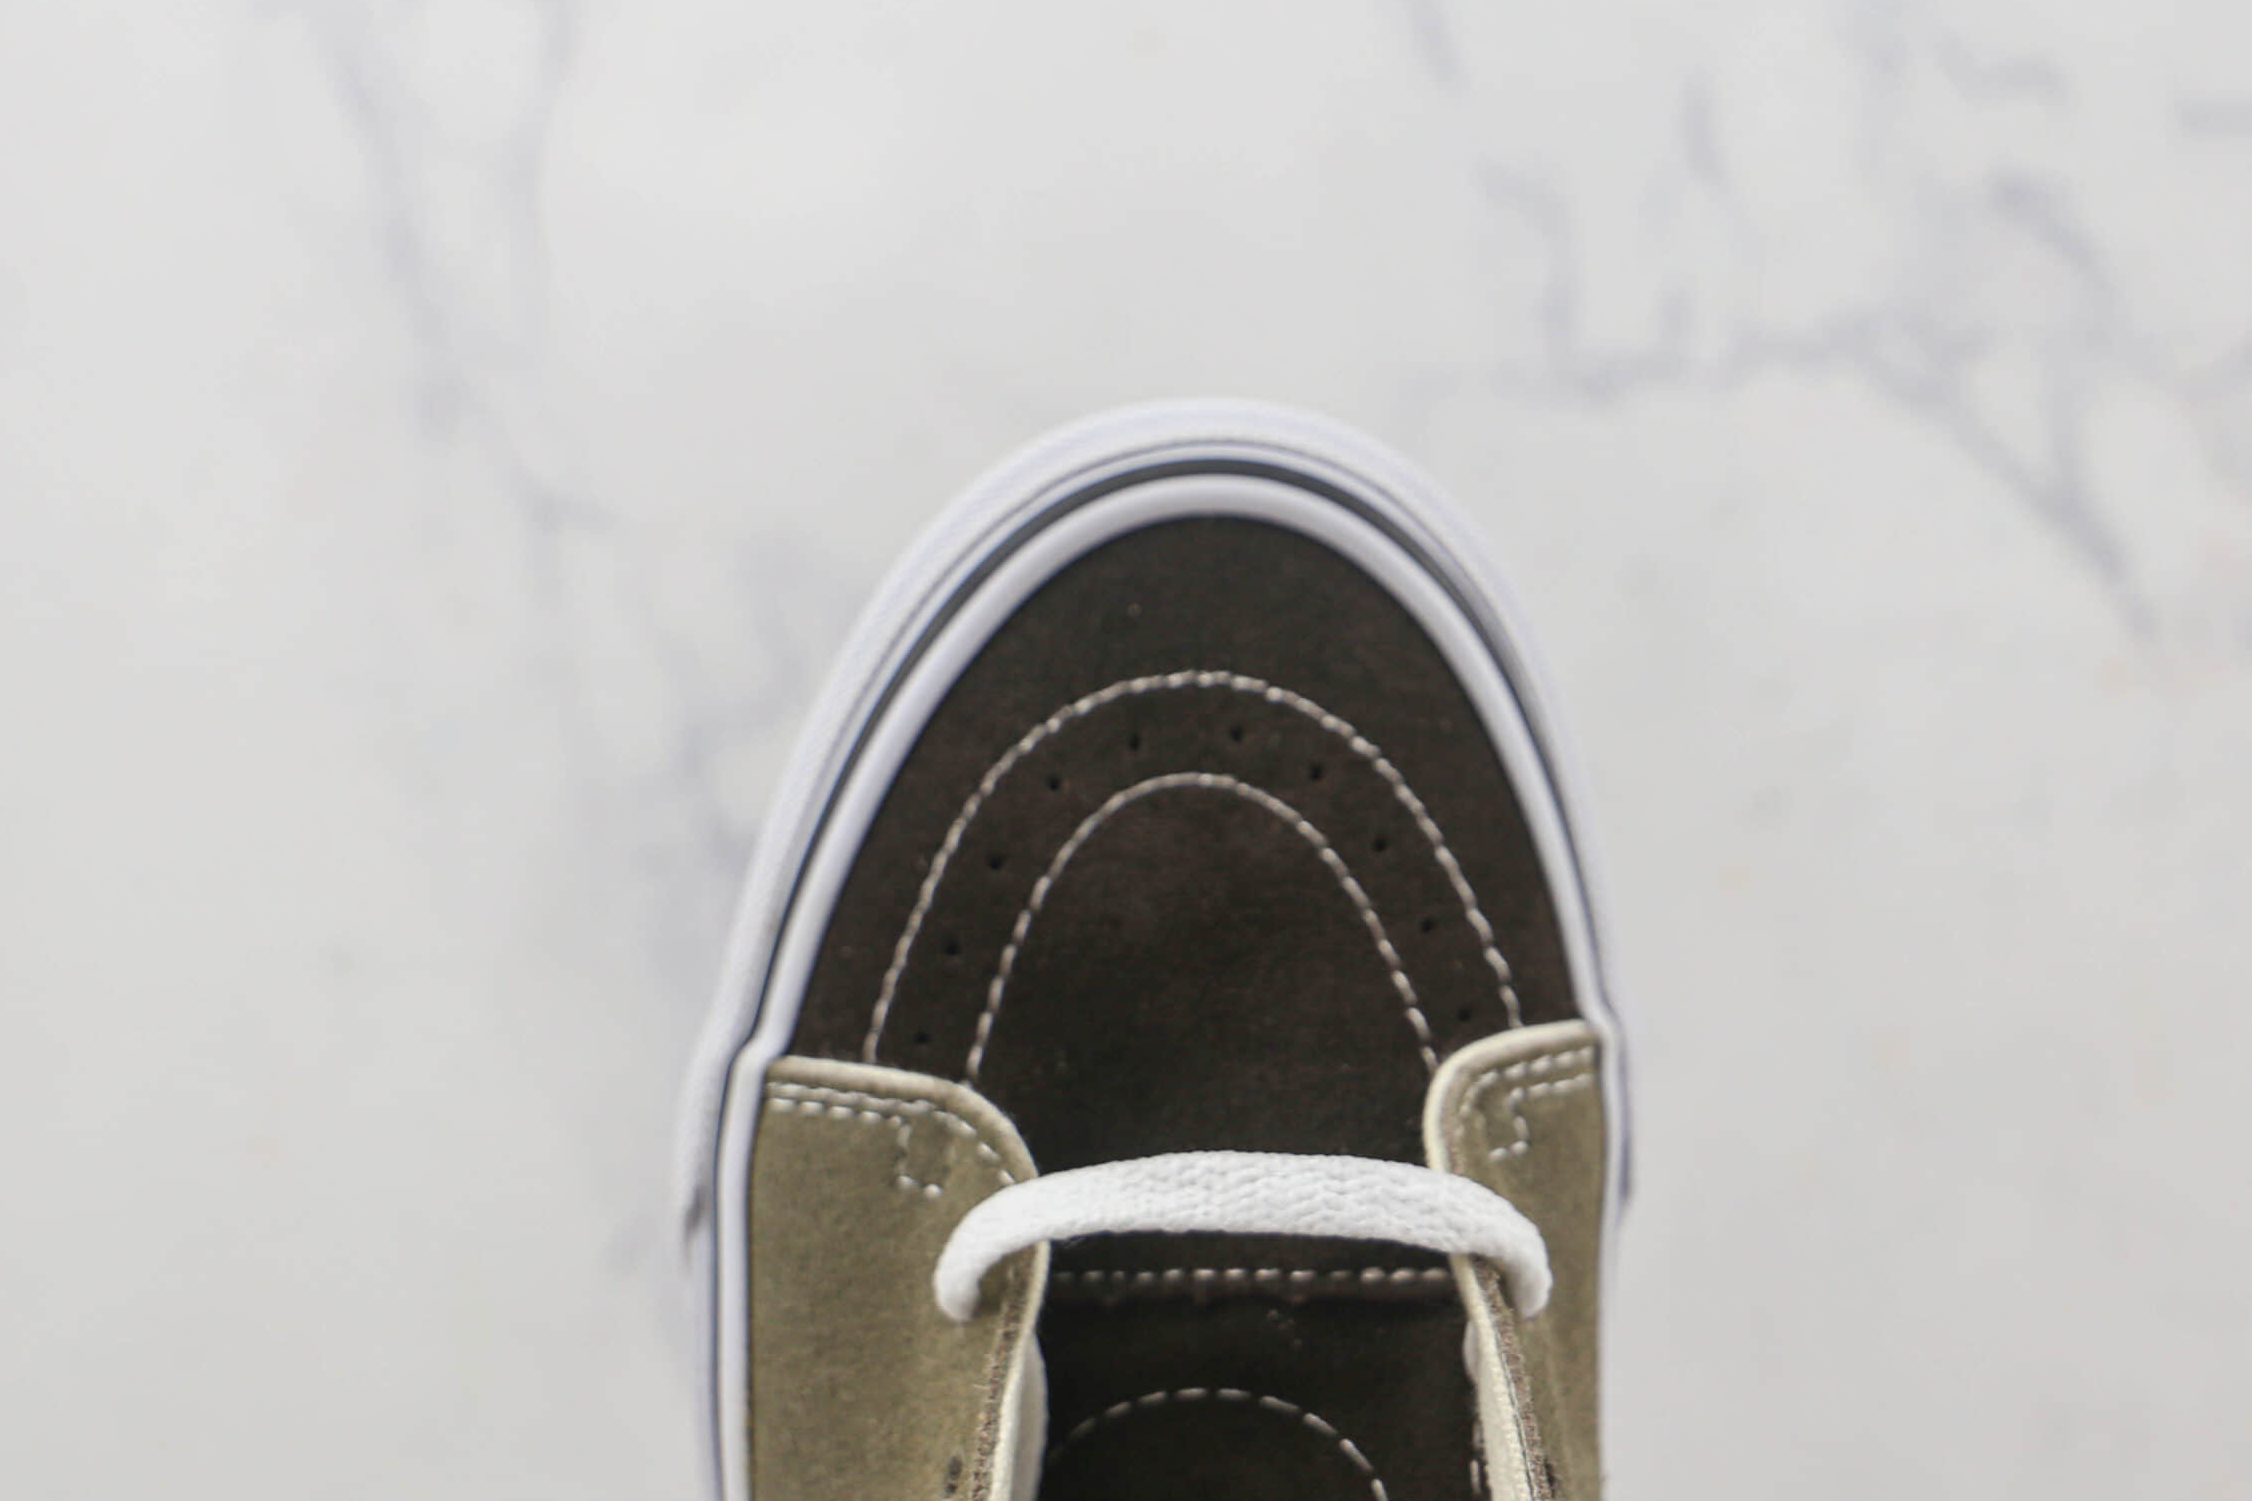 Vans Skate Shoes 'Brown Gray' VN0A4UUKB7J - Stylish and Durable Footwear